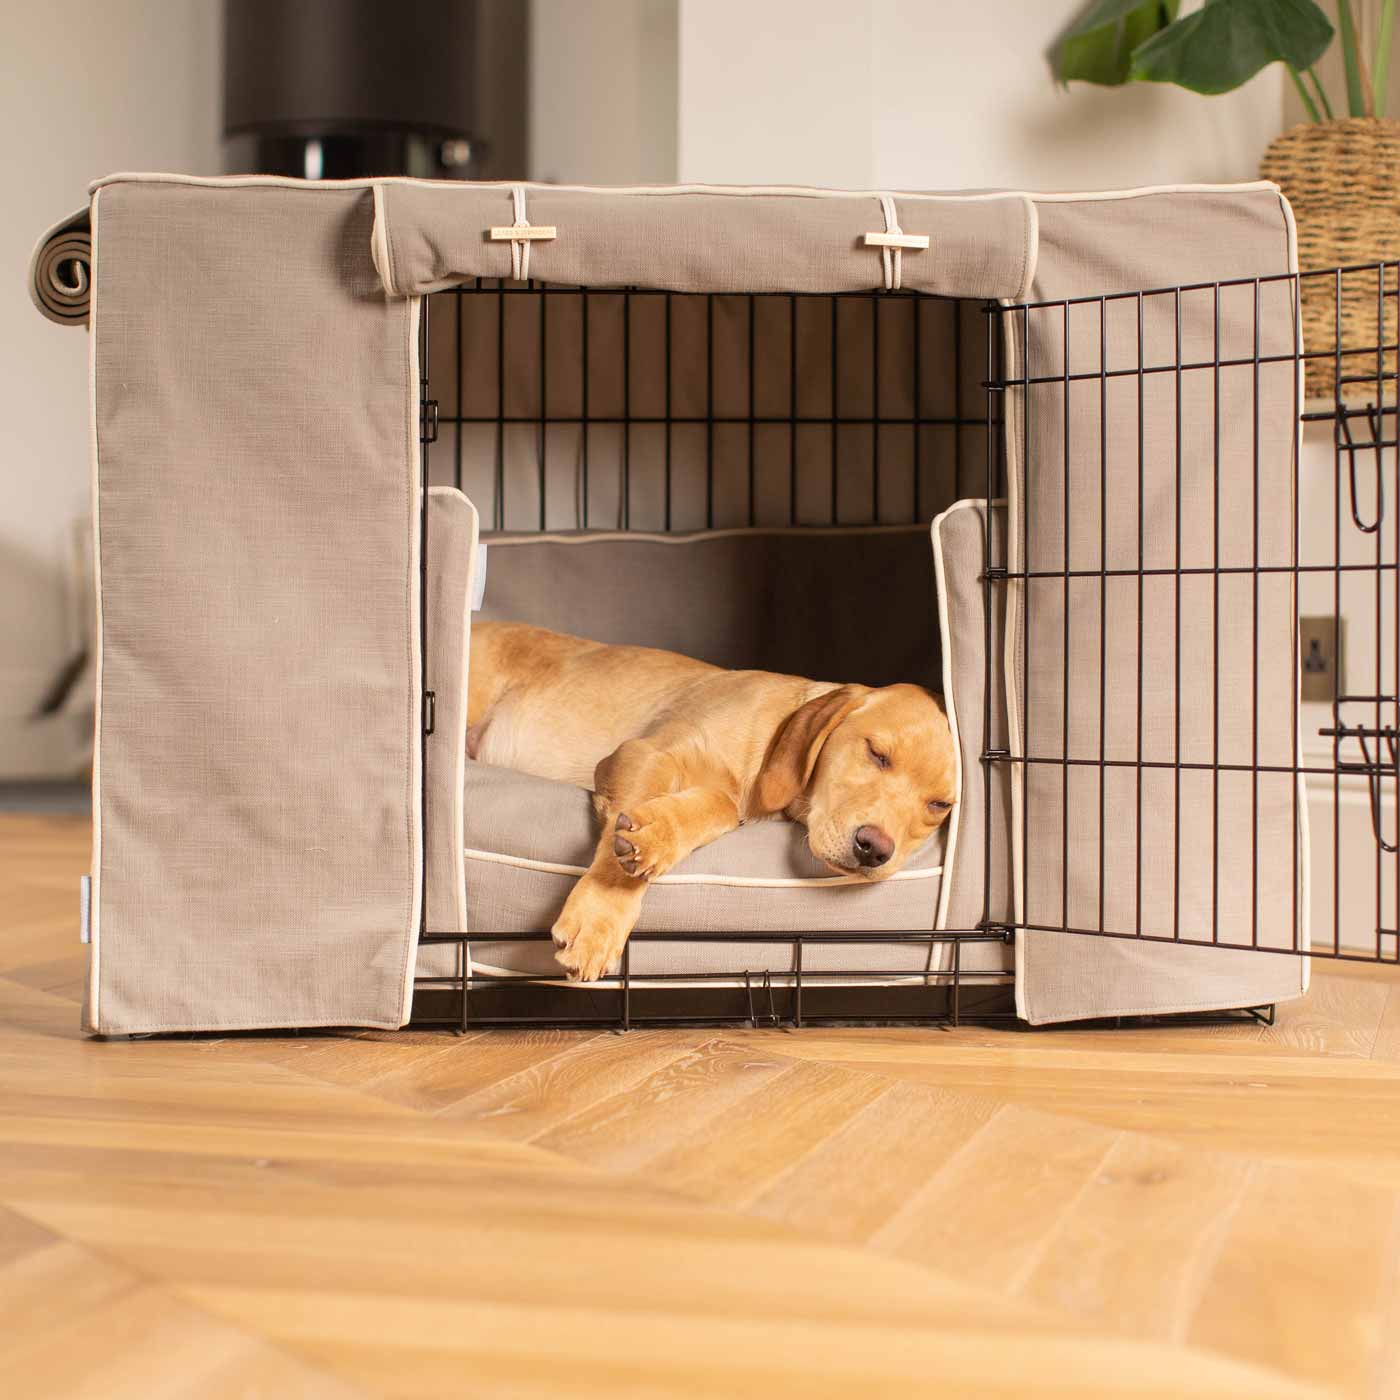 Luxury Heavy Duty Dog Crate, In Stunning Savanna Stone Crate Set, The Perfect Dog Crate Set For Building The Ultimate Pet Den! Dog Crate Cover Available To Personalise at Lords & Labradors